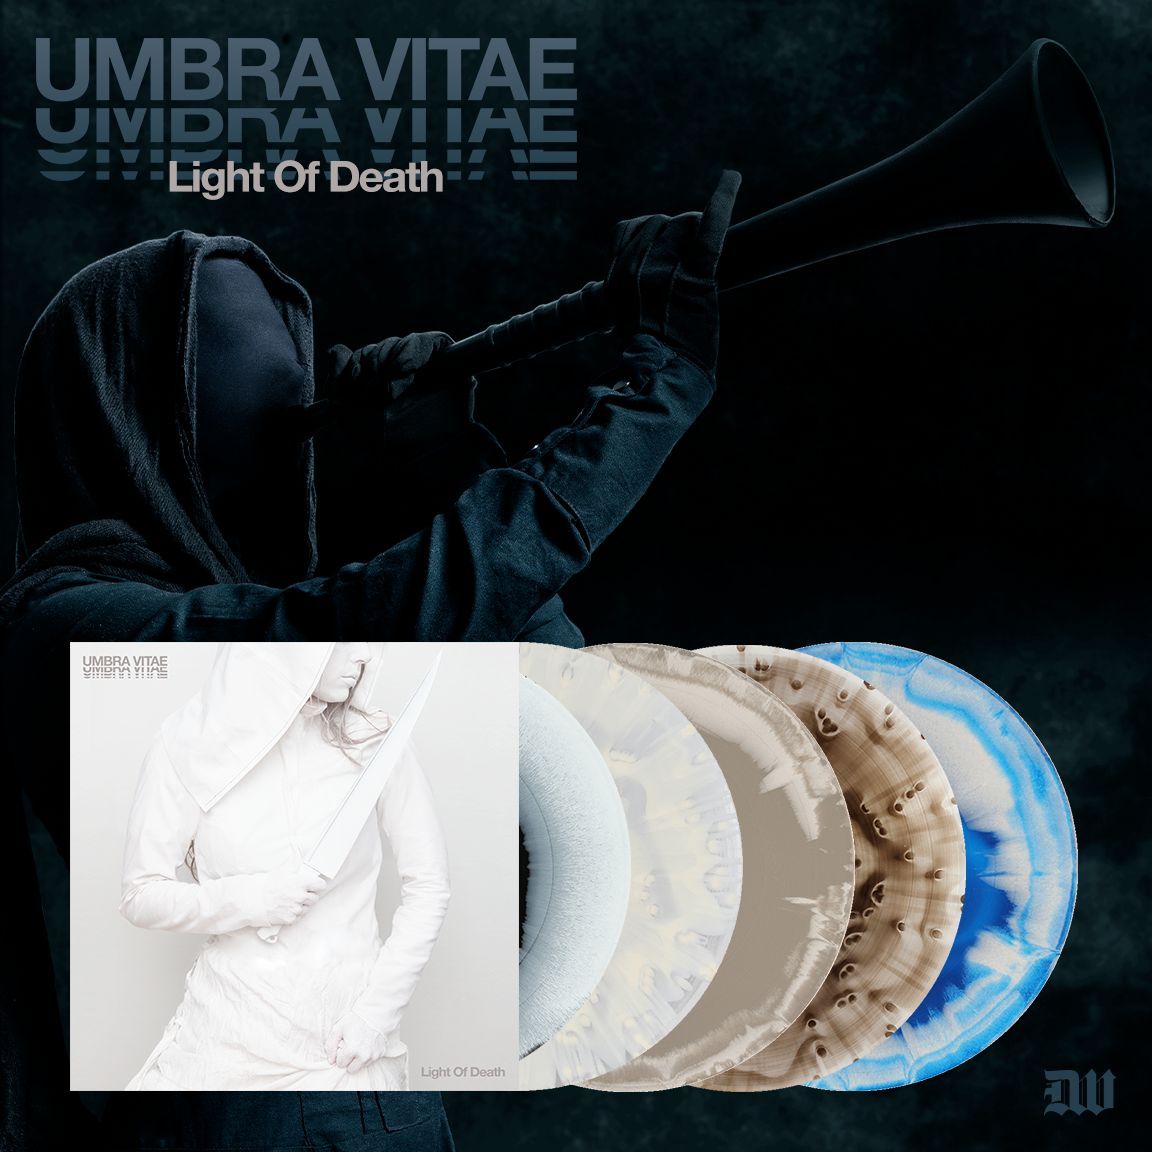 Umbra Vitae 'Light Of Death' out June 7th Listen to 'Belief Is Obsolete' and pre-order now 🔪 umbravitae.com #UmbraVitae #LightOfDeath #DeathwishInc